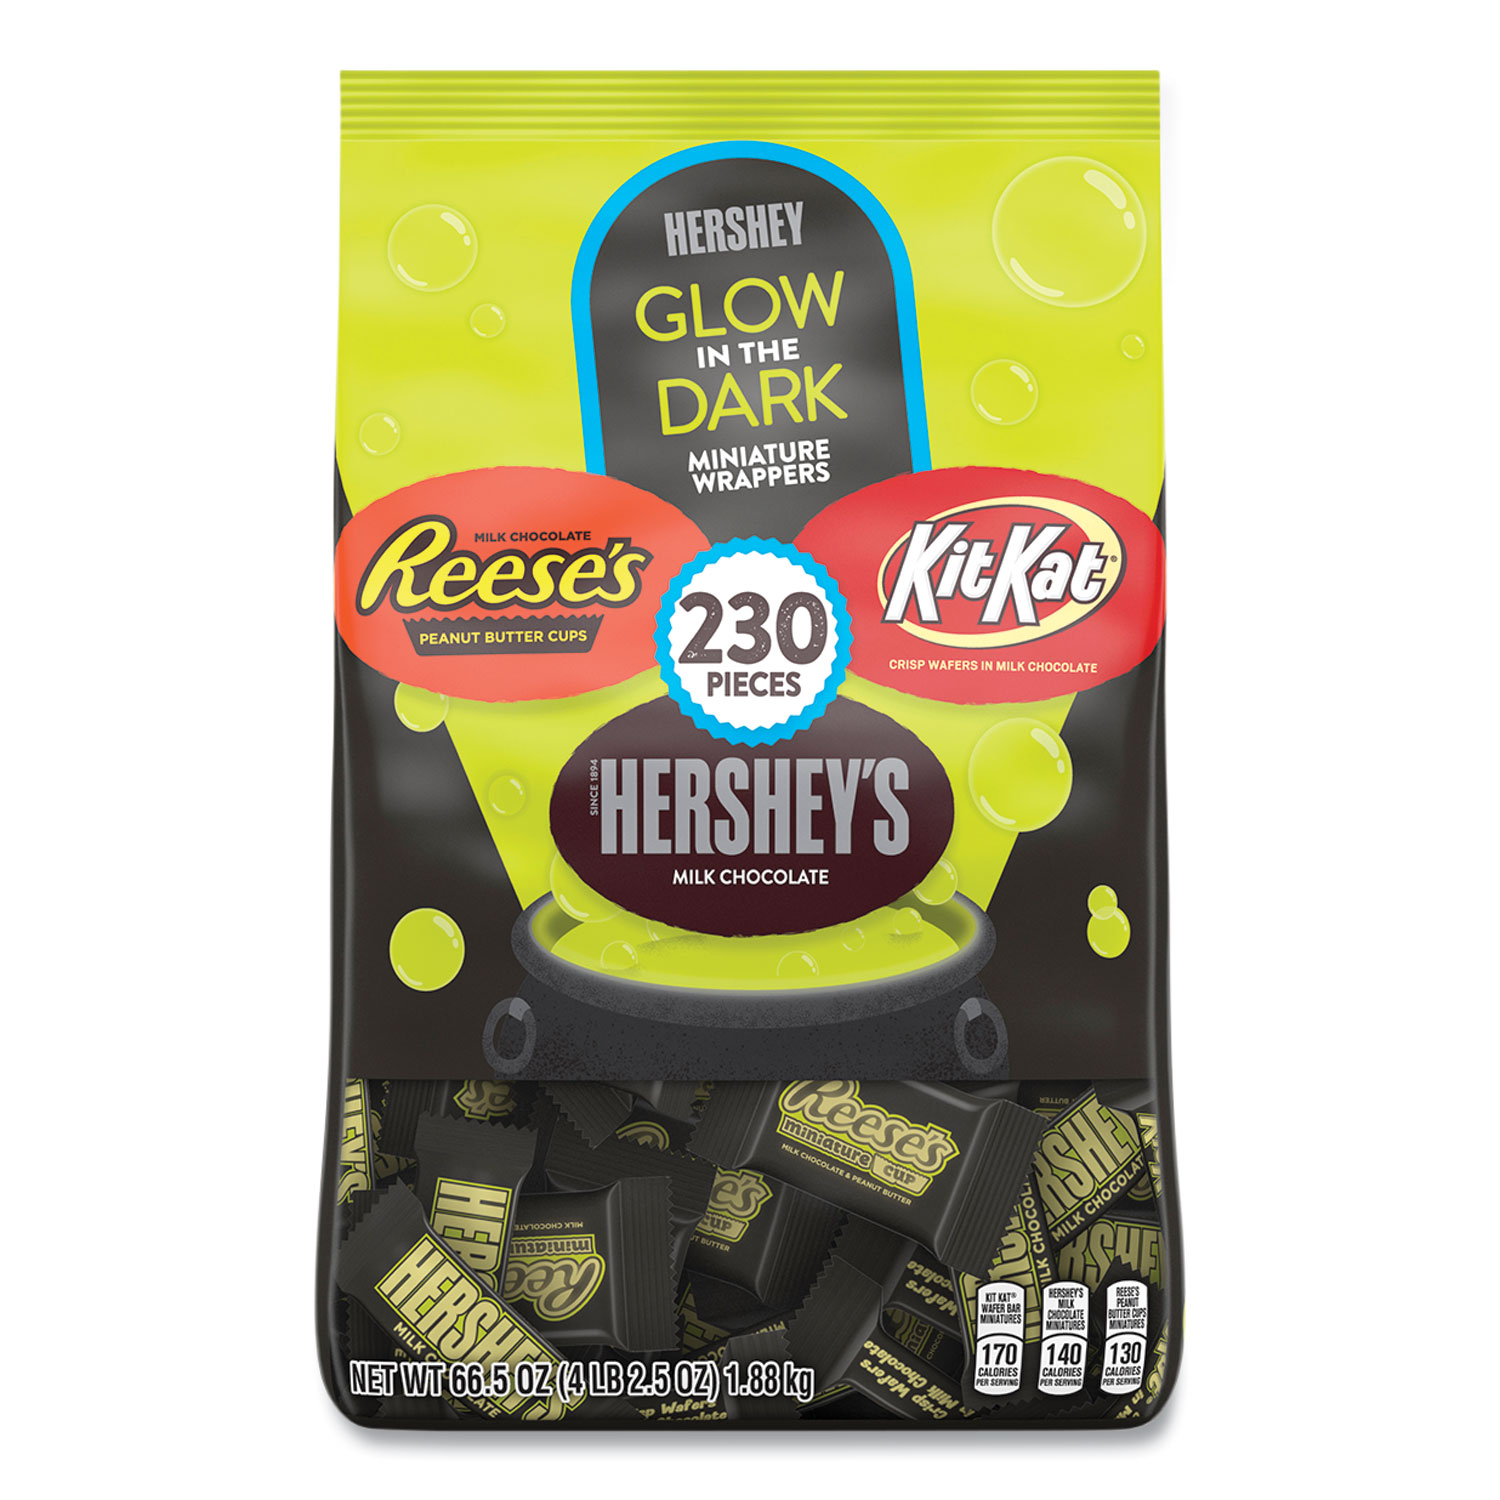  Hershey's HEC48052 Glow In The Dark Miniature Wrappers, 66.5 oz Bag, 230 Pieces (HRS24442489) 